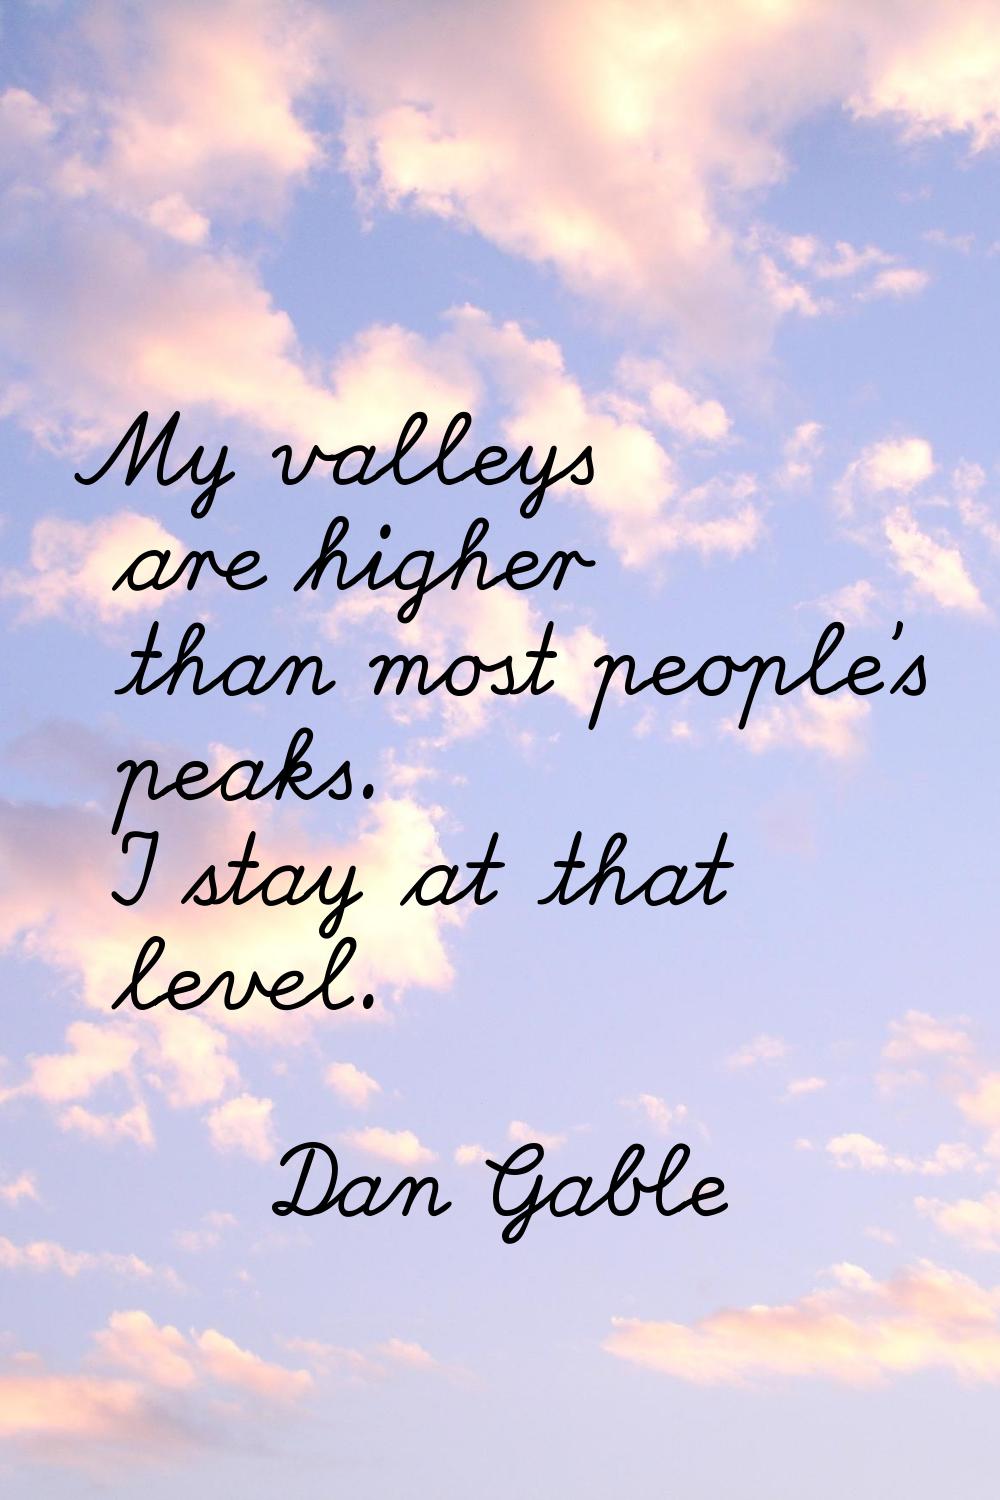 My valleys are higher than most people's peaks. I stay at that level.